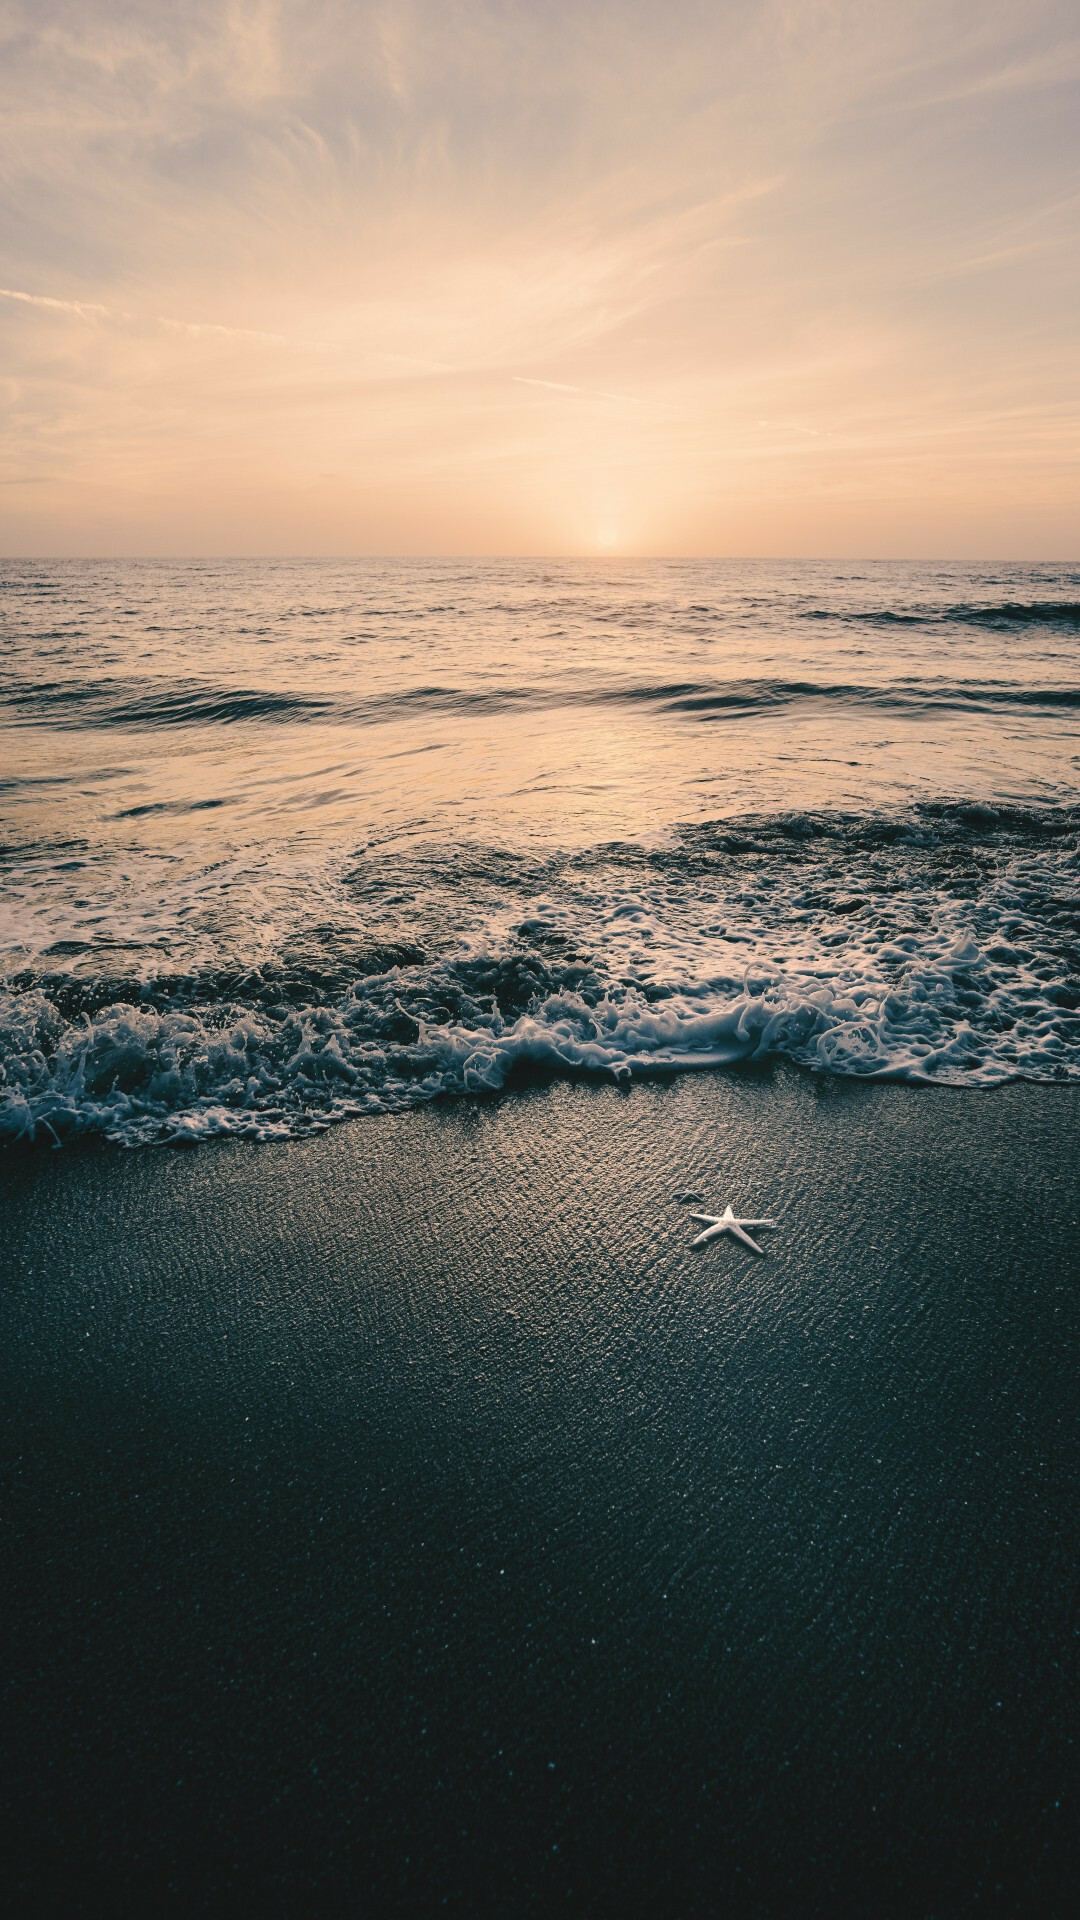 Starfish: Download  Seascape, Beach, Starfish, Waves, Twilight Wallpapers  for iPhone 8, iPhone 7 Plus, iPhone 6+, Sony Xperia Z, HTC One. 1080x1920 Full HD Background.